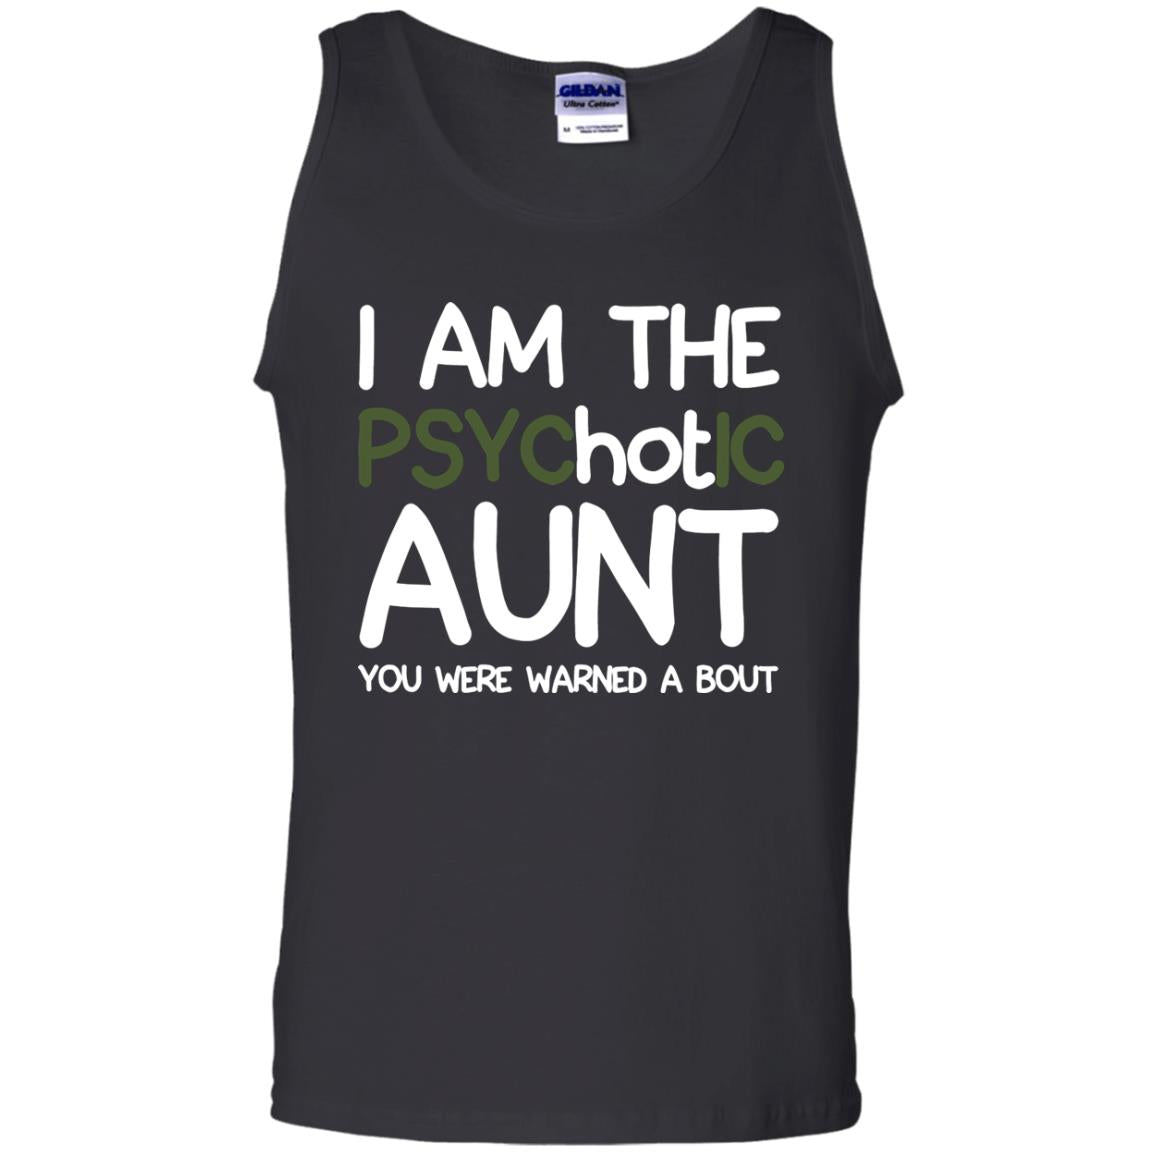 I_m The Psychotic Aunt You Were Warned About Hot Aunt T-shirtG220 Gildan 100% Cotton Tank Top